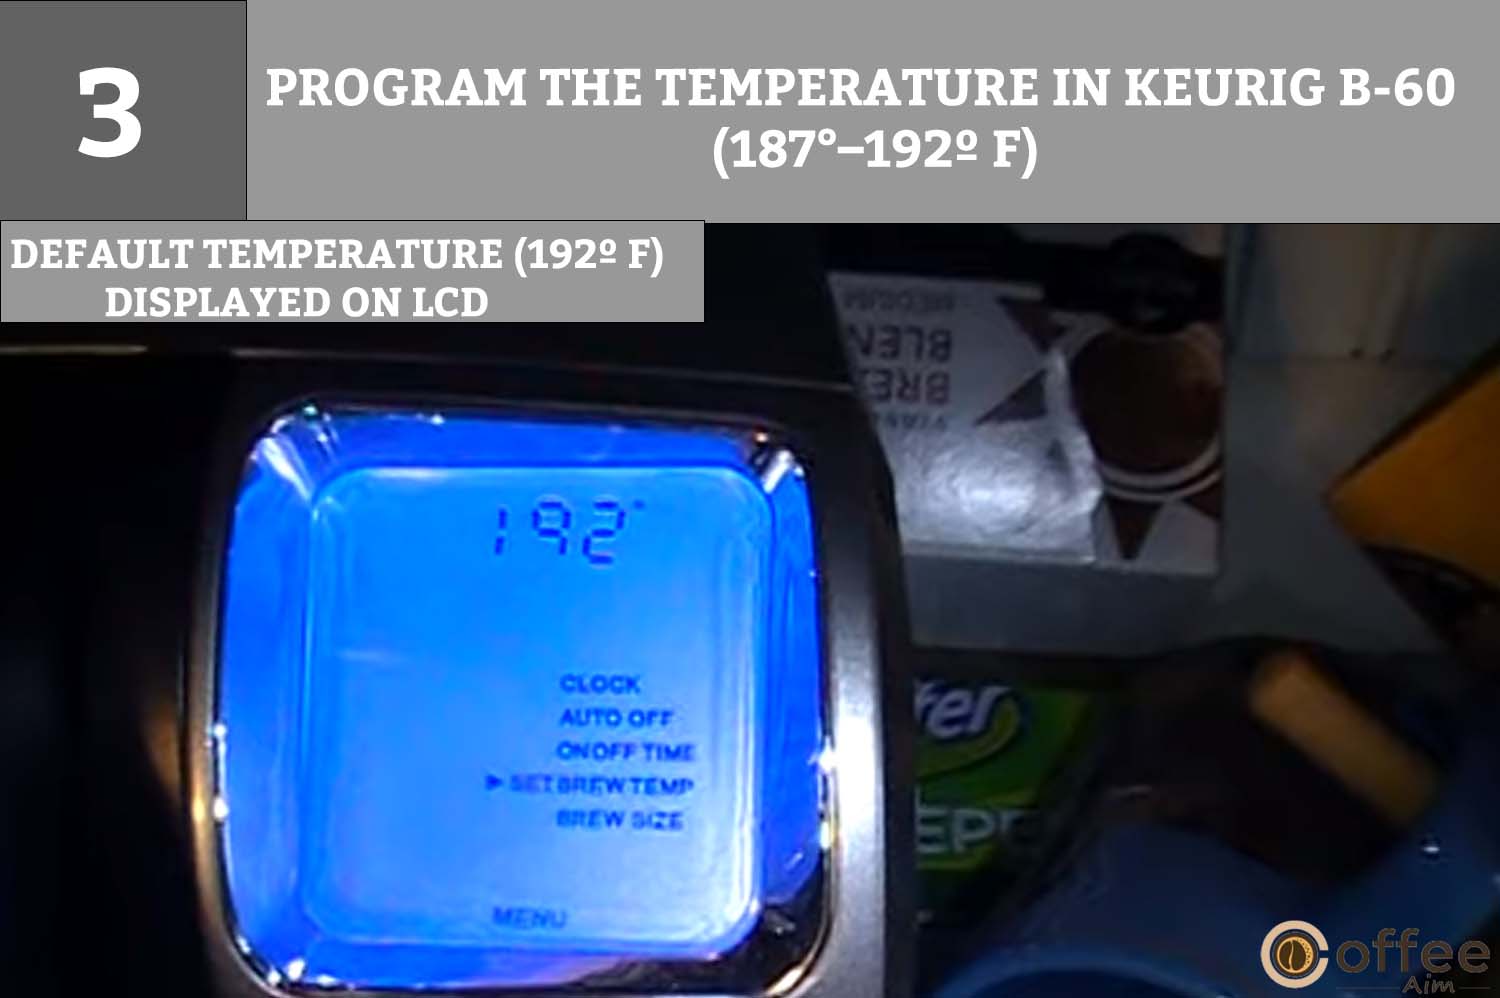 The default temperature (192º F) will also display on the LCD.